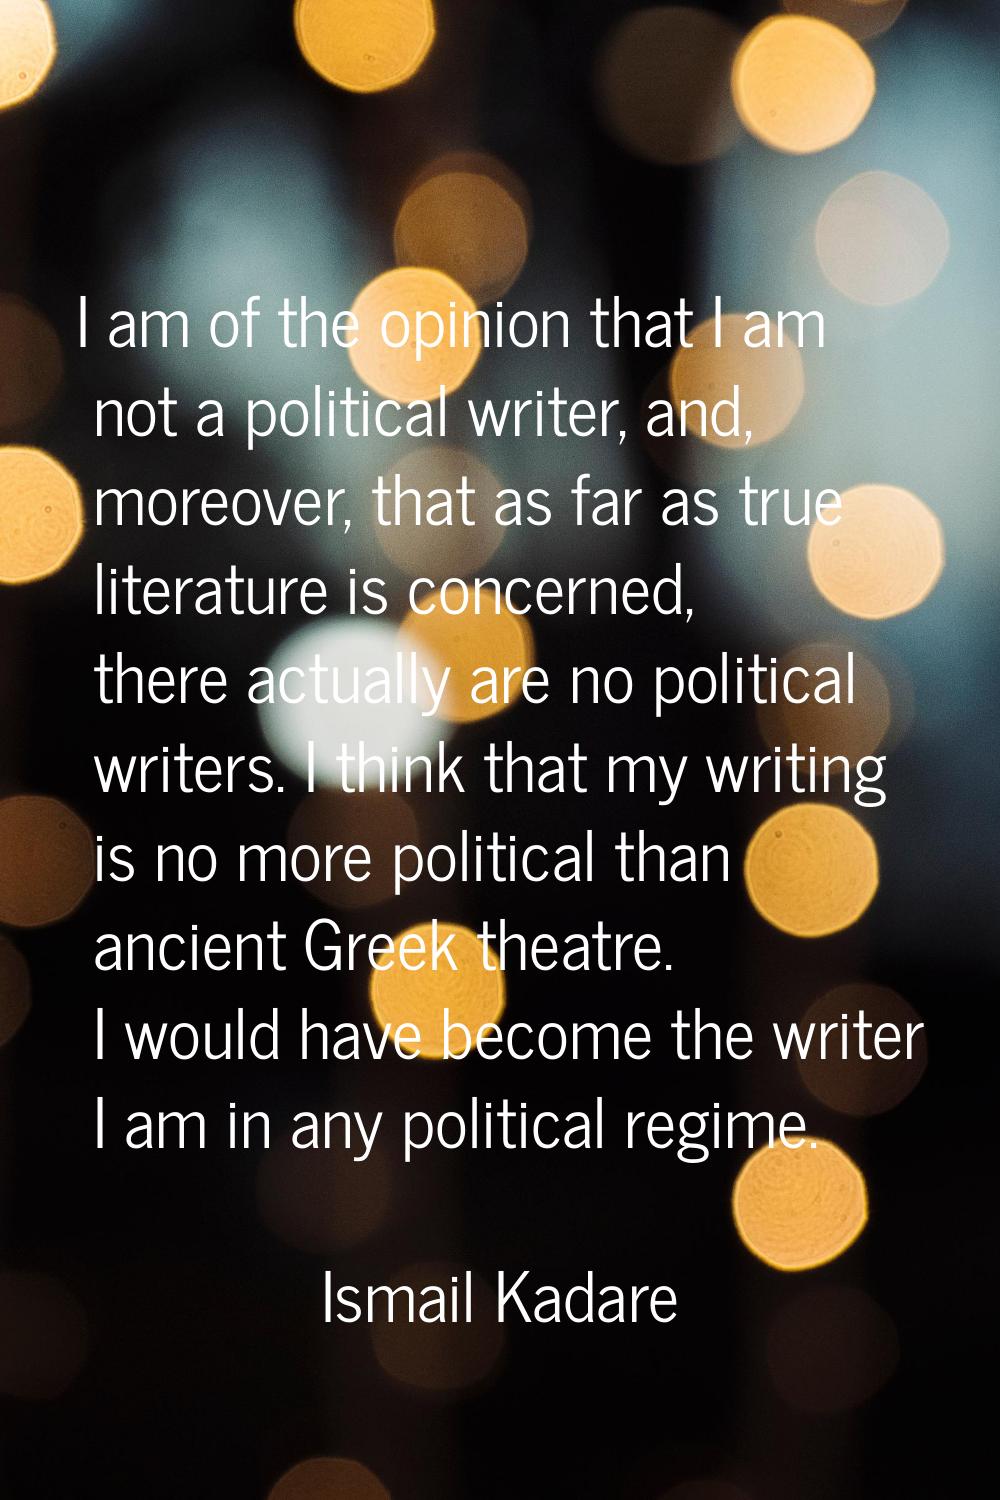 I am of the opinion that I am not a political writer, and, moreover, that as far as true literature